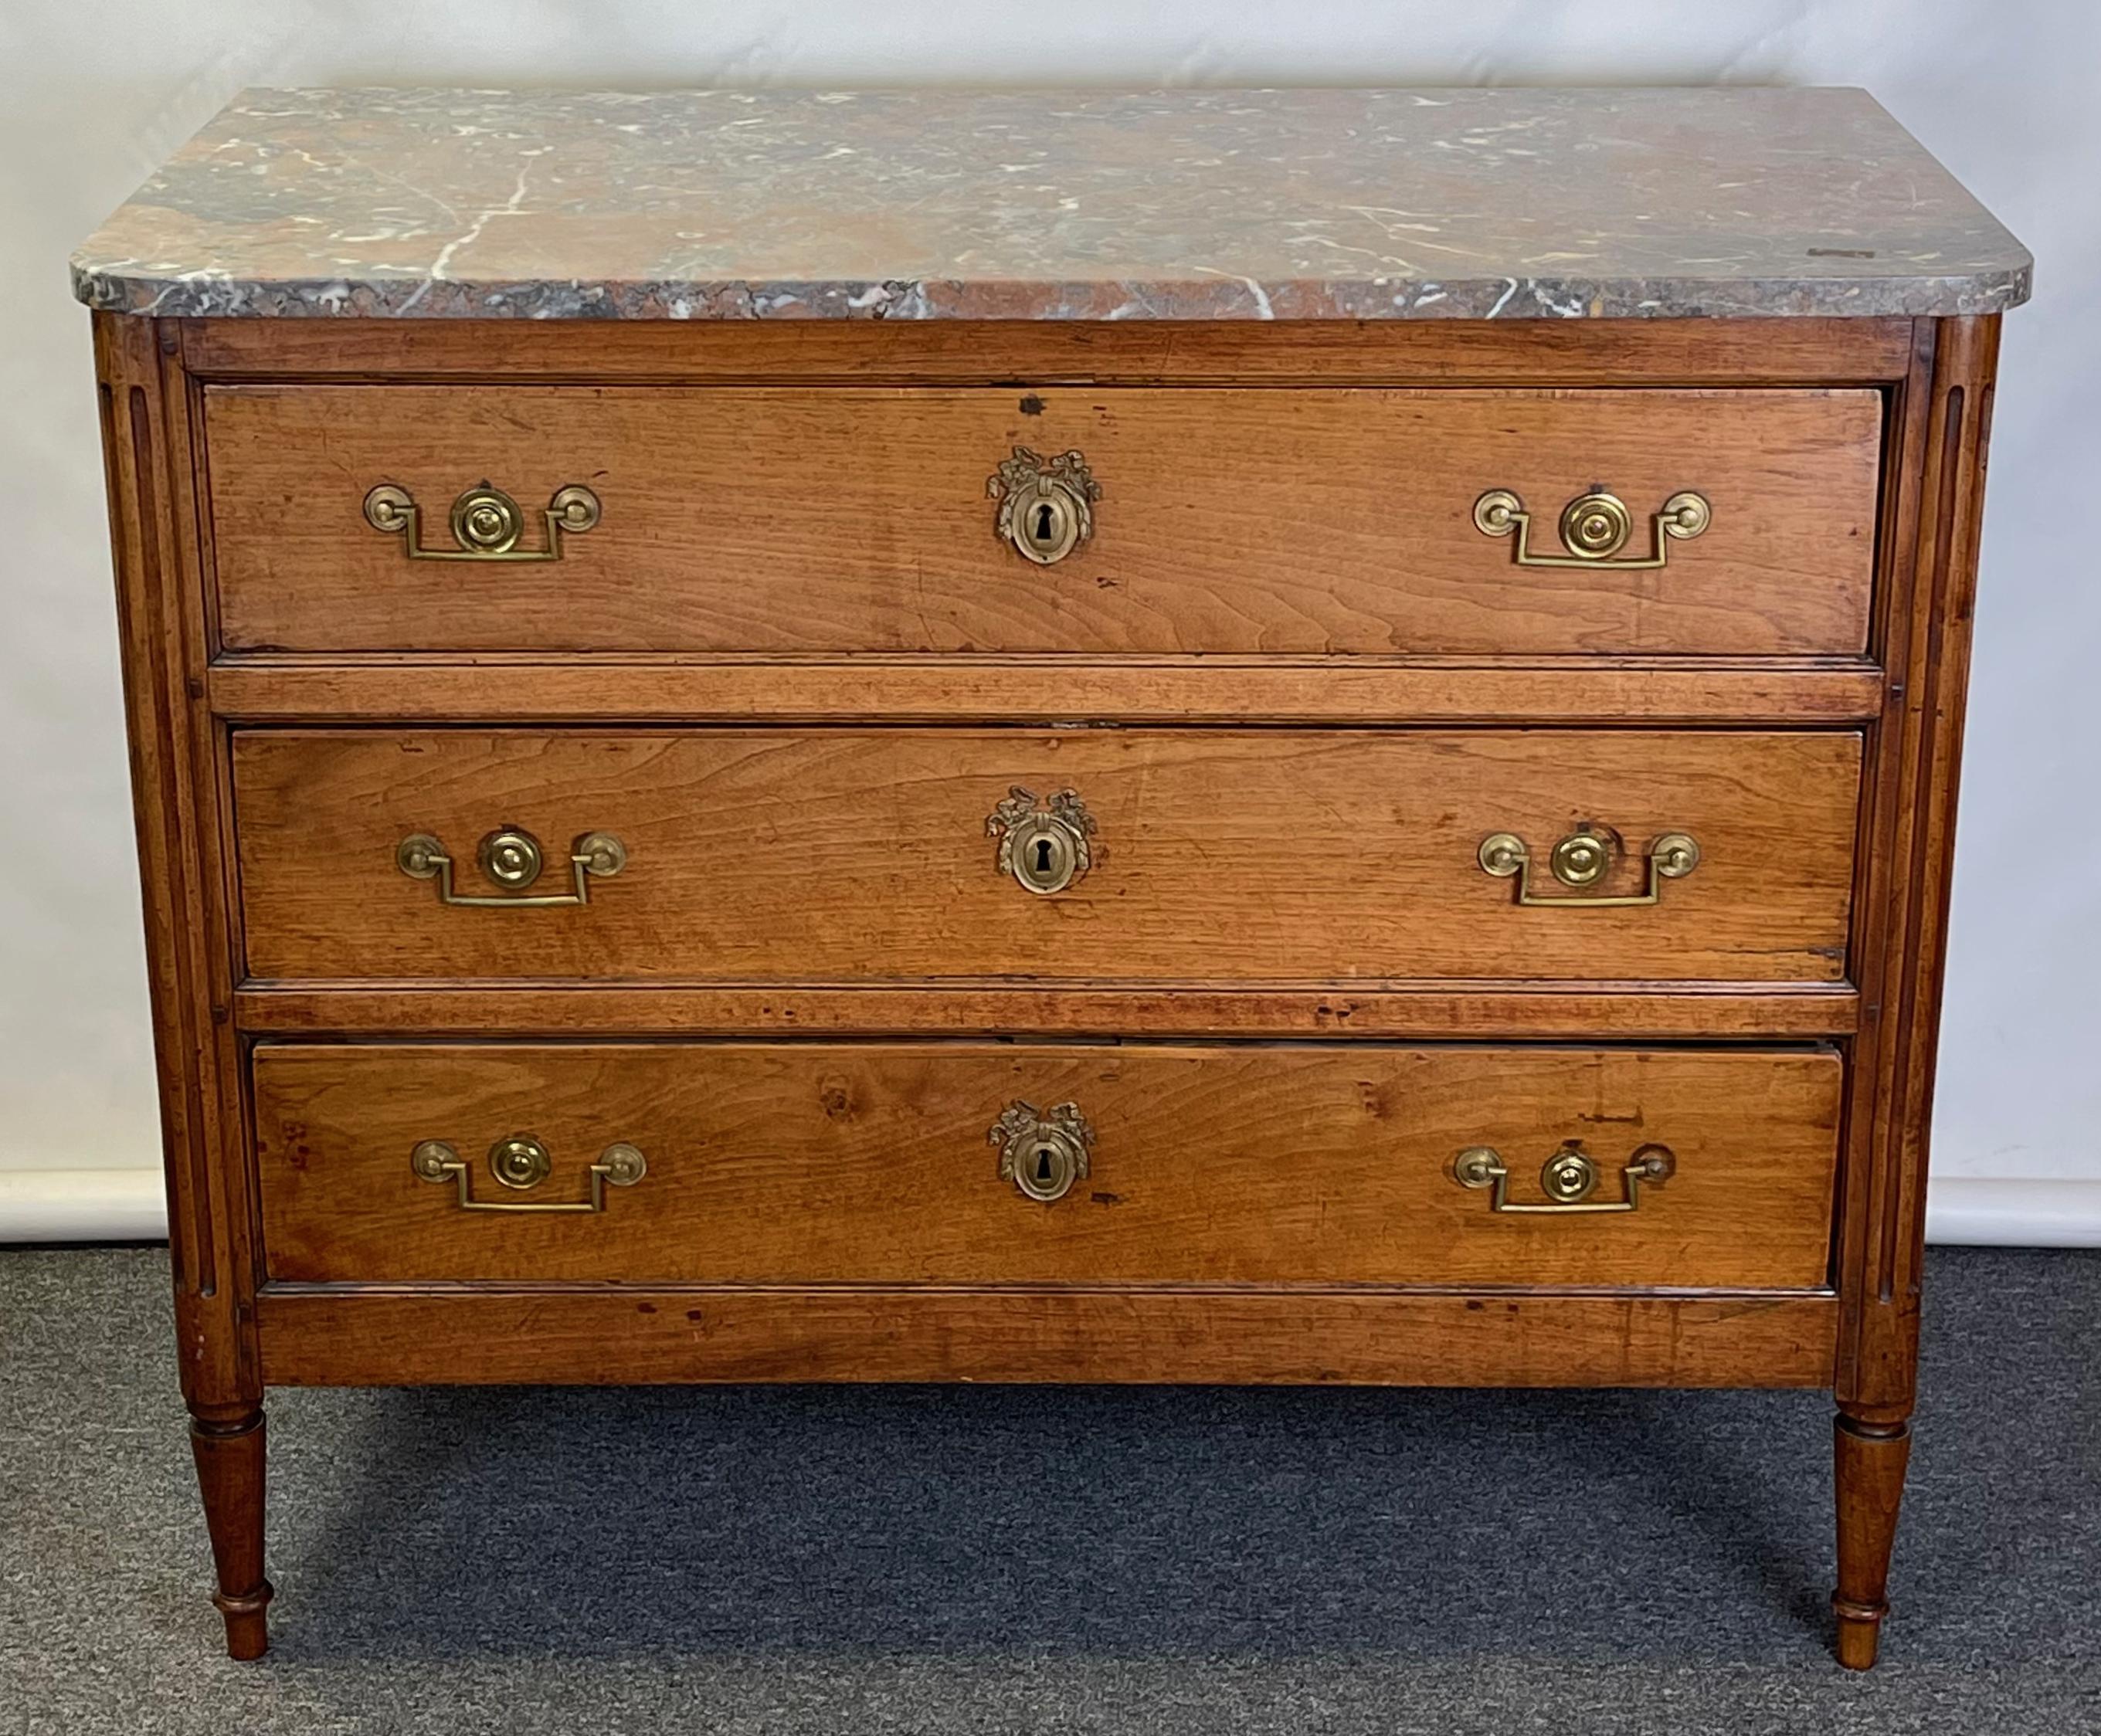 A late 18th C. French three drawer fruitwood commode with old, possibly original marble top.